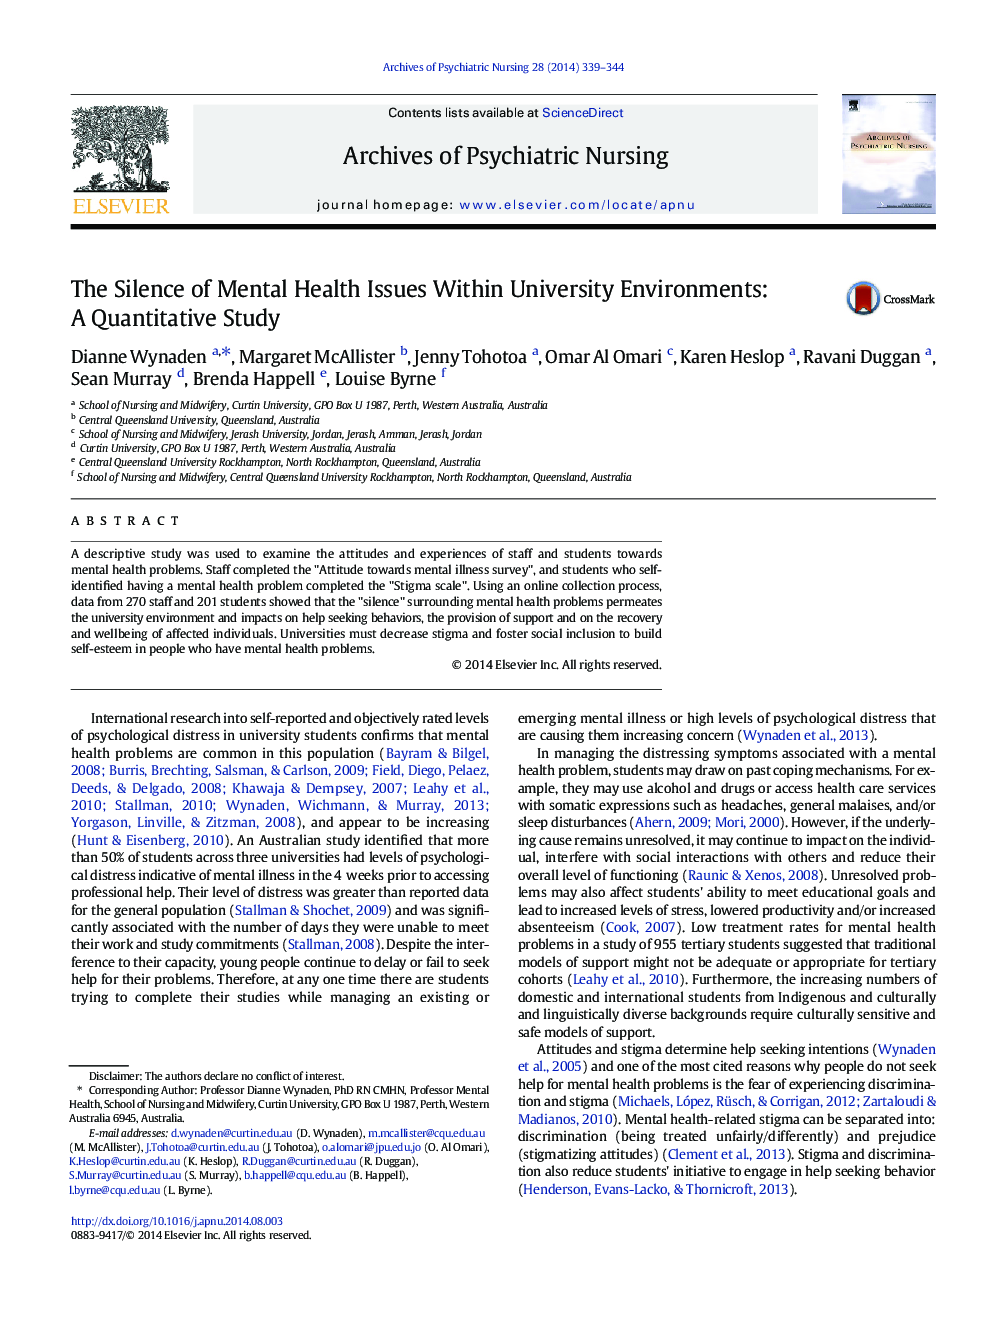 The Silence of Mental Health Issues Within University Environments: A Quantitative Study 